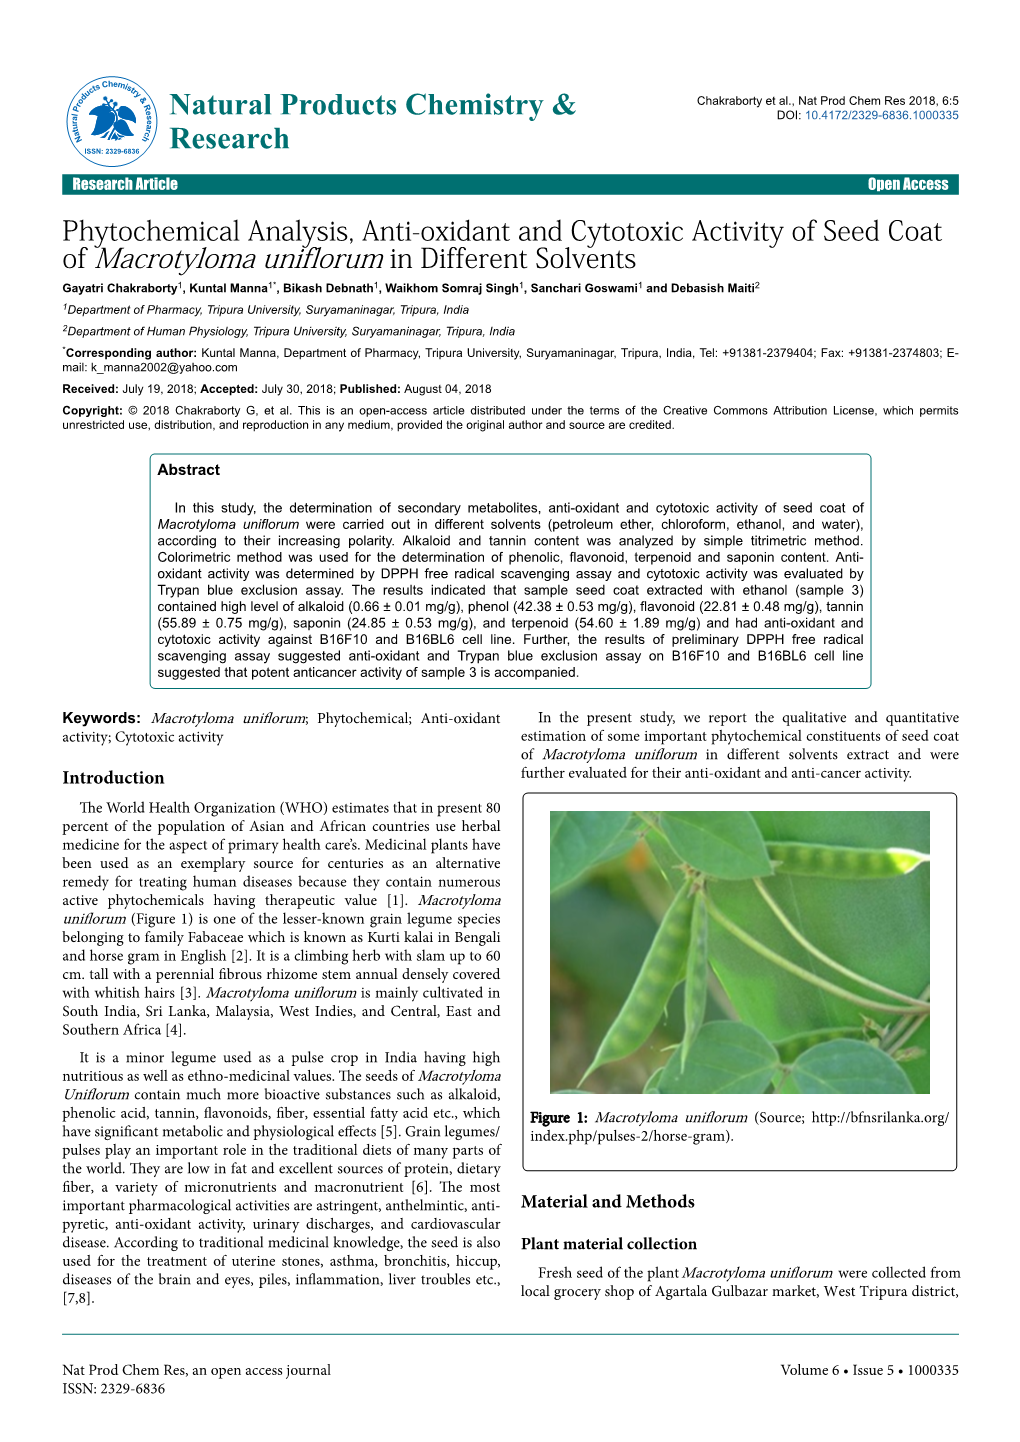 Phytochemical Analysis, Anti-Oxidant and Cytotoxic Activity of Seed Coat